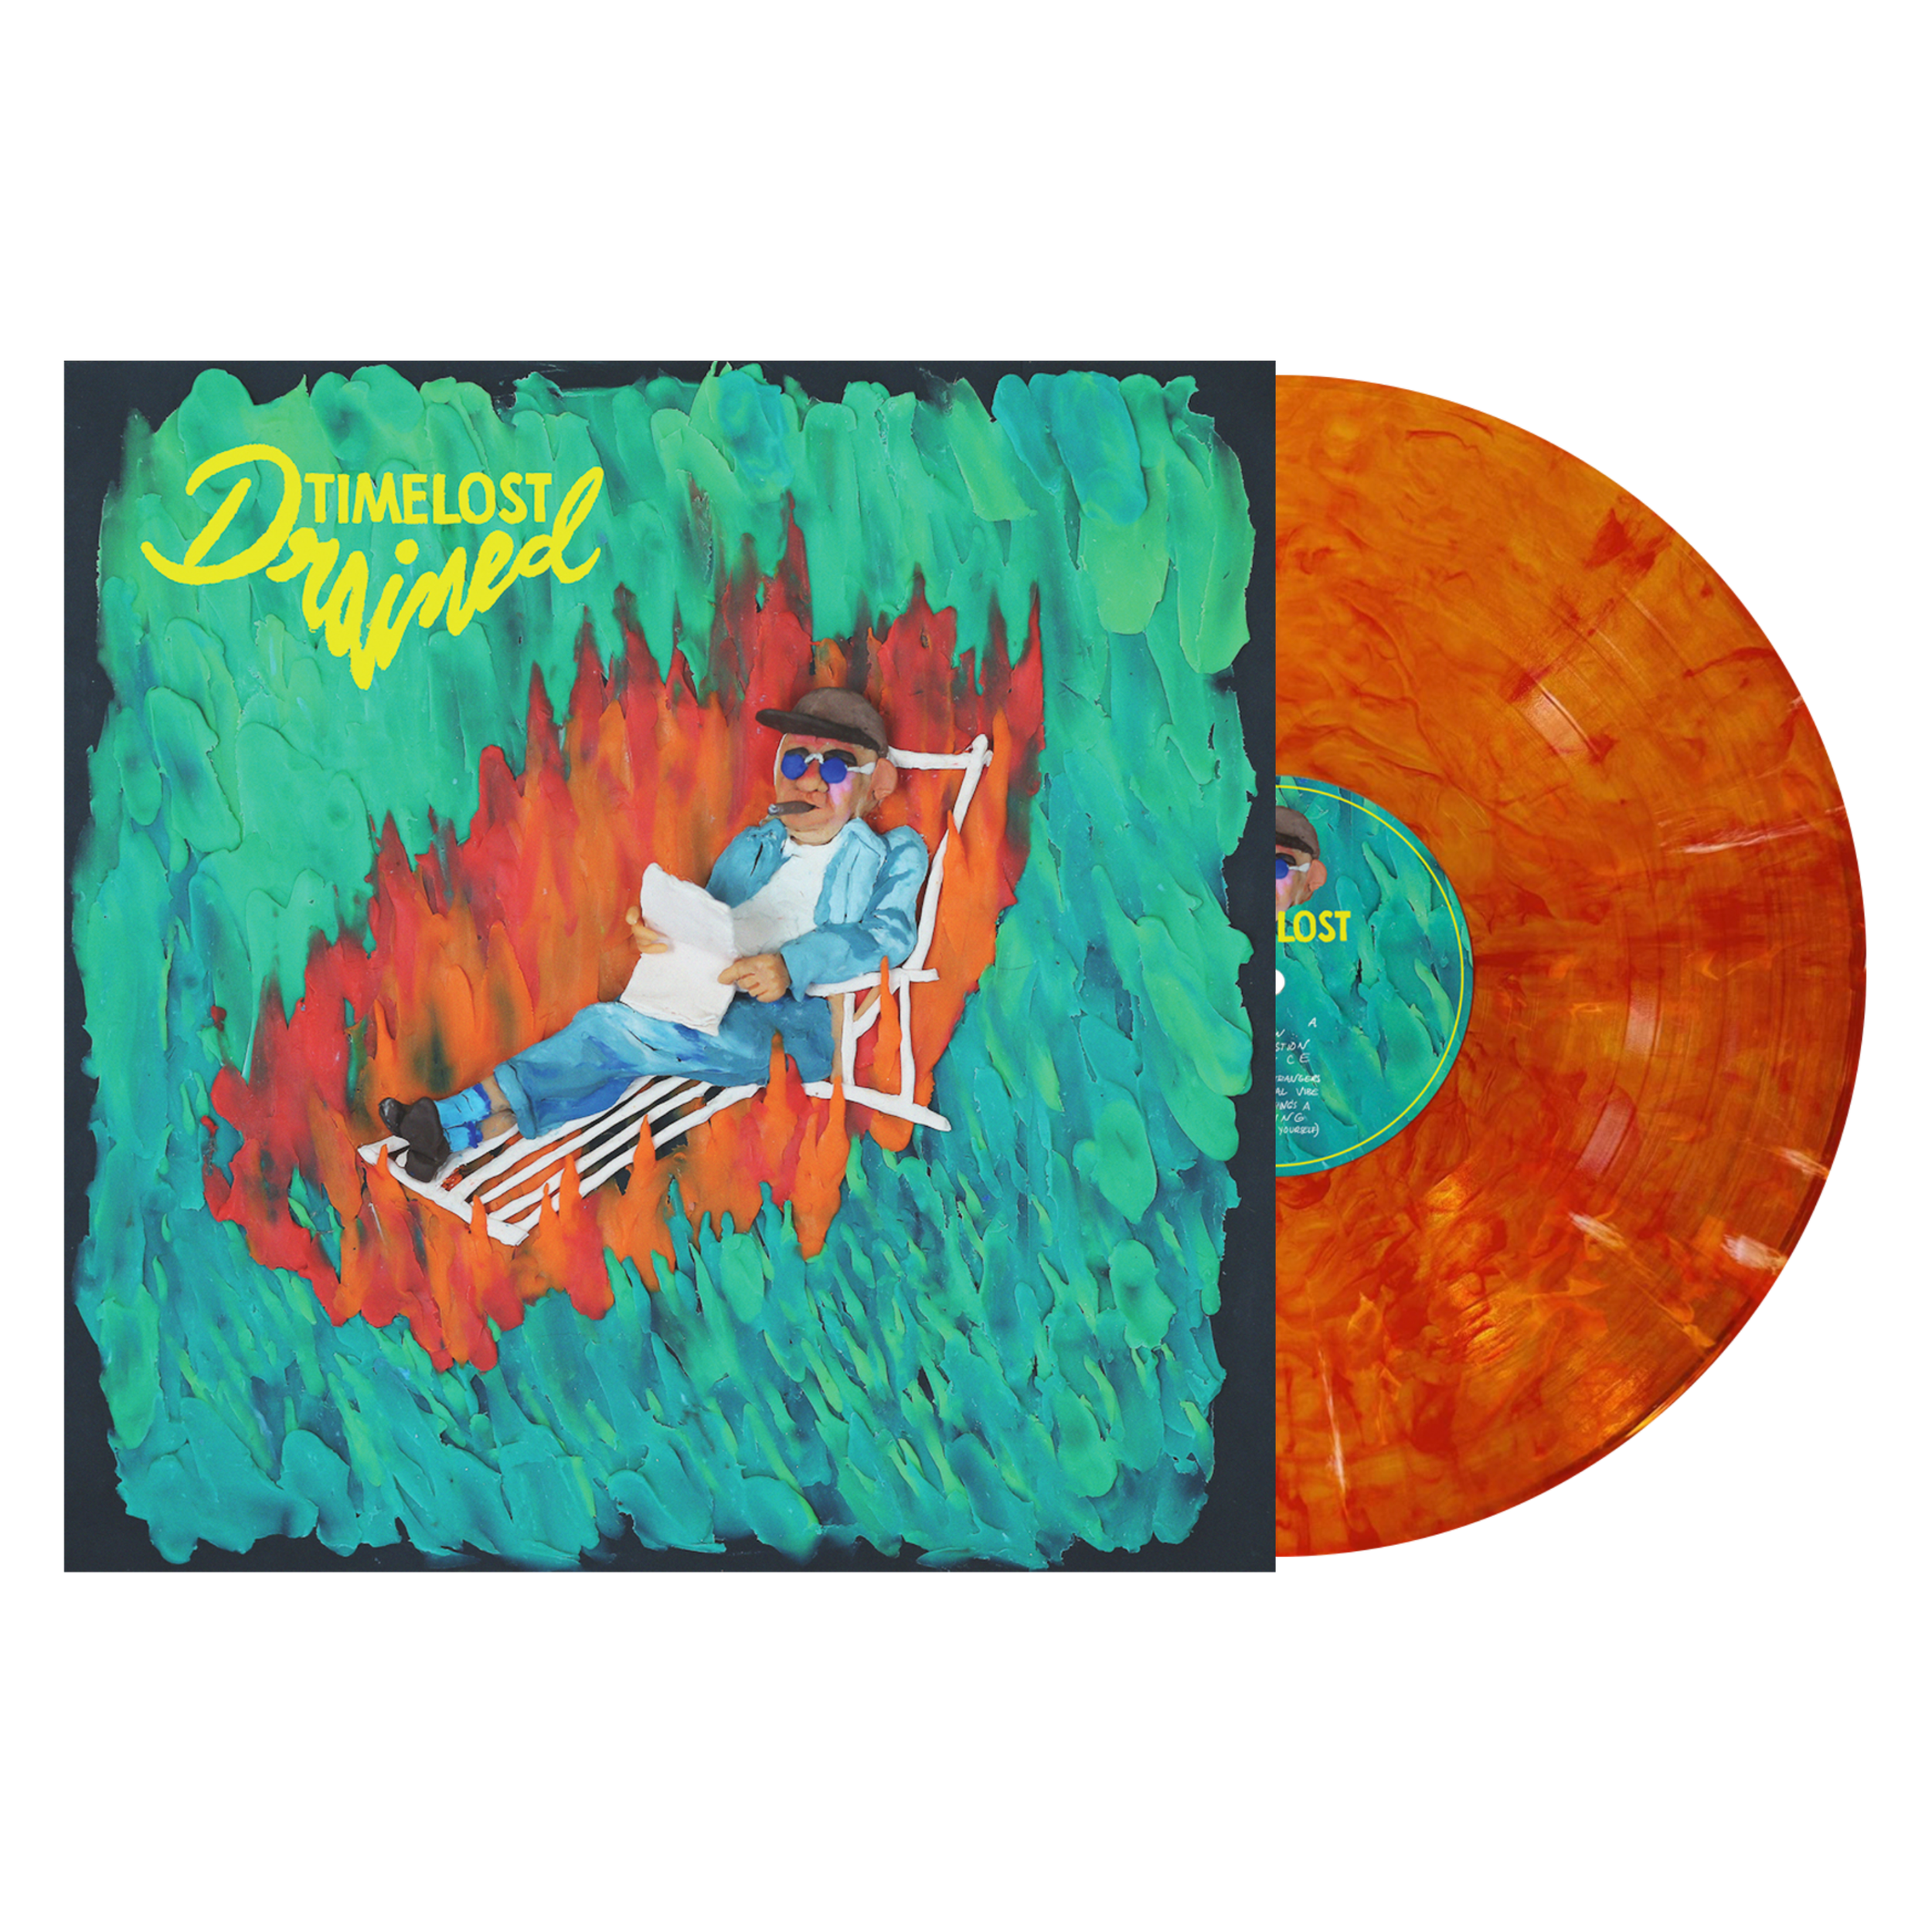 Timelost - Drained - Vinyl - Orange Marble.png